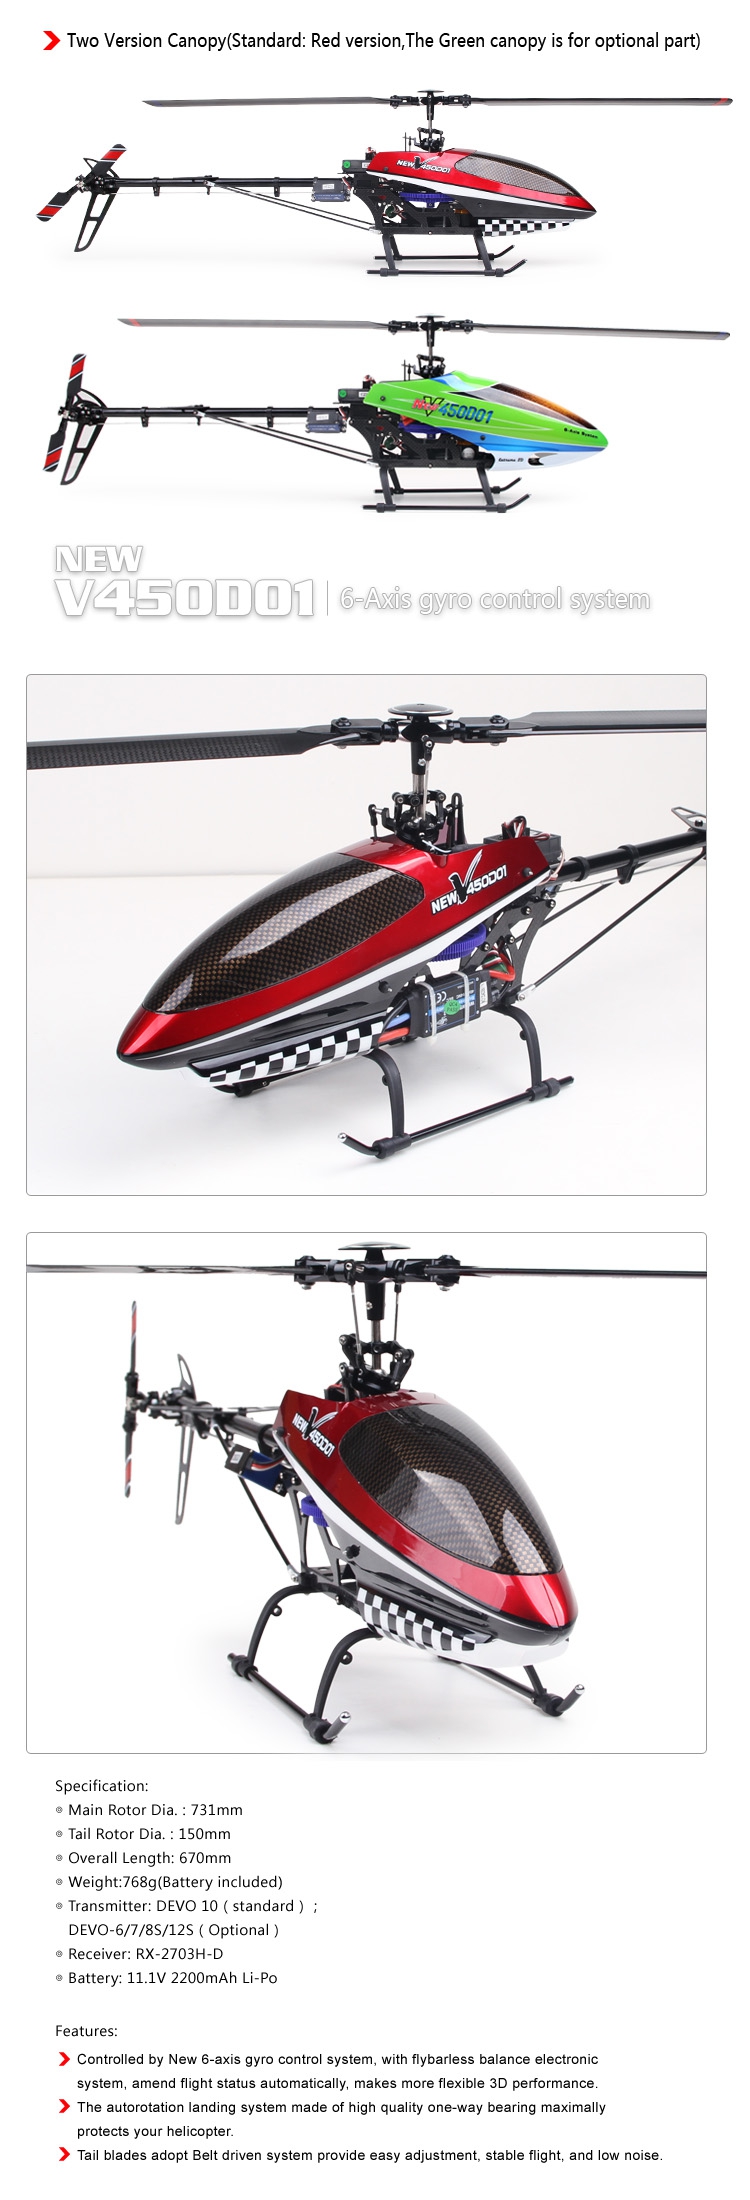 Walkera New V450D01 V2 6CH Brushless 6-Axis 3D Helicopter BNF